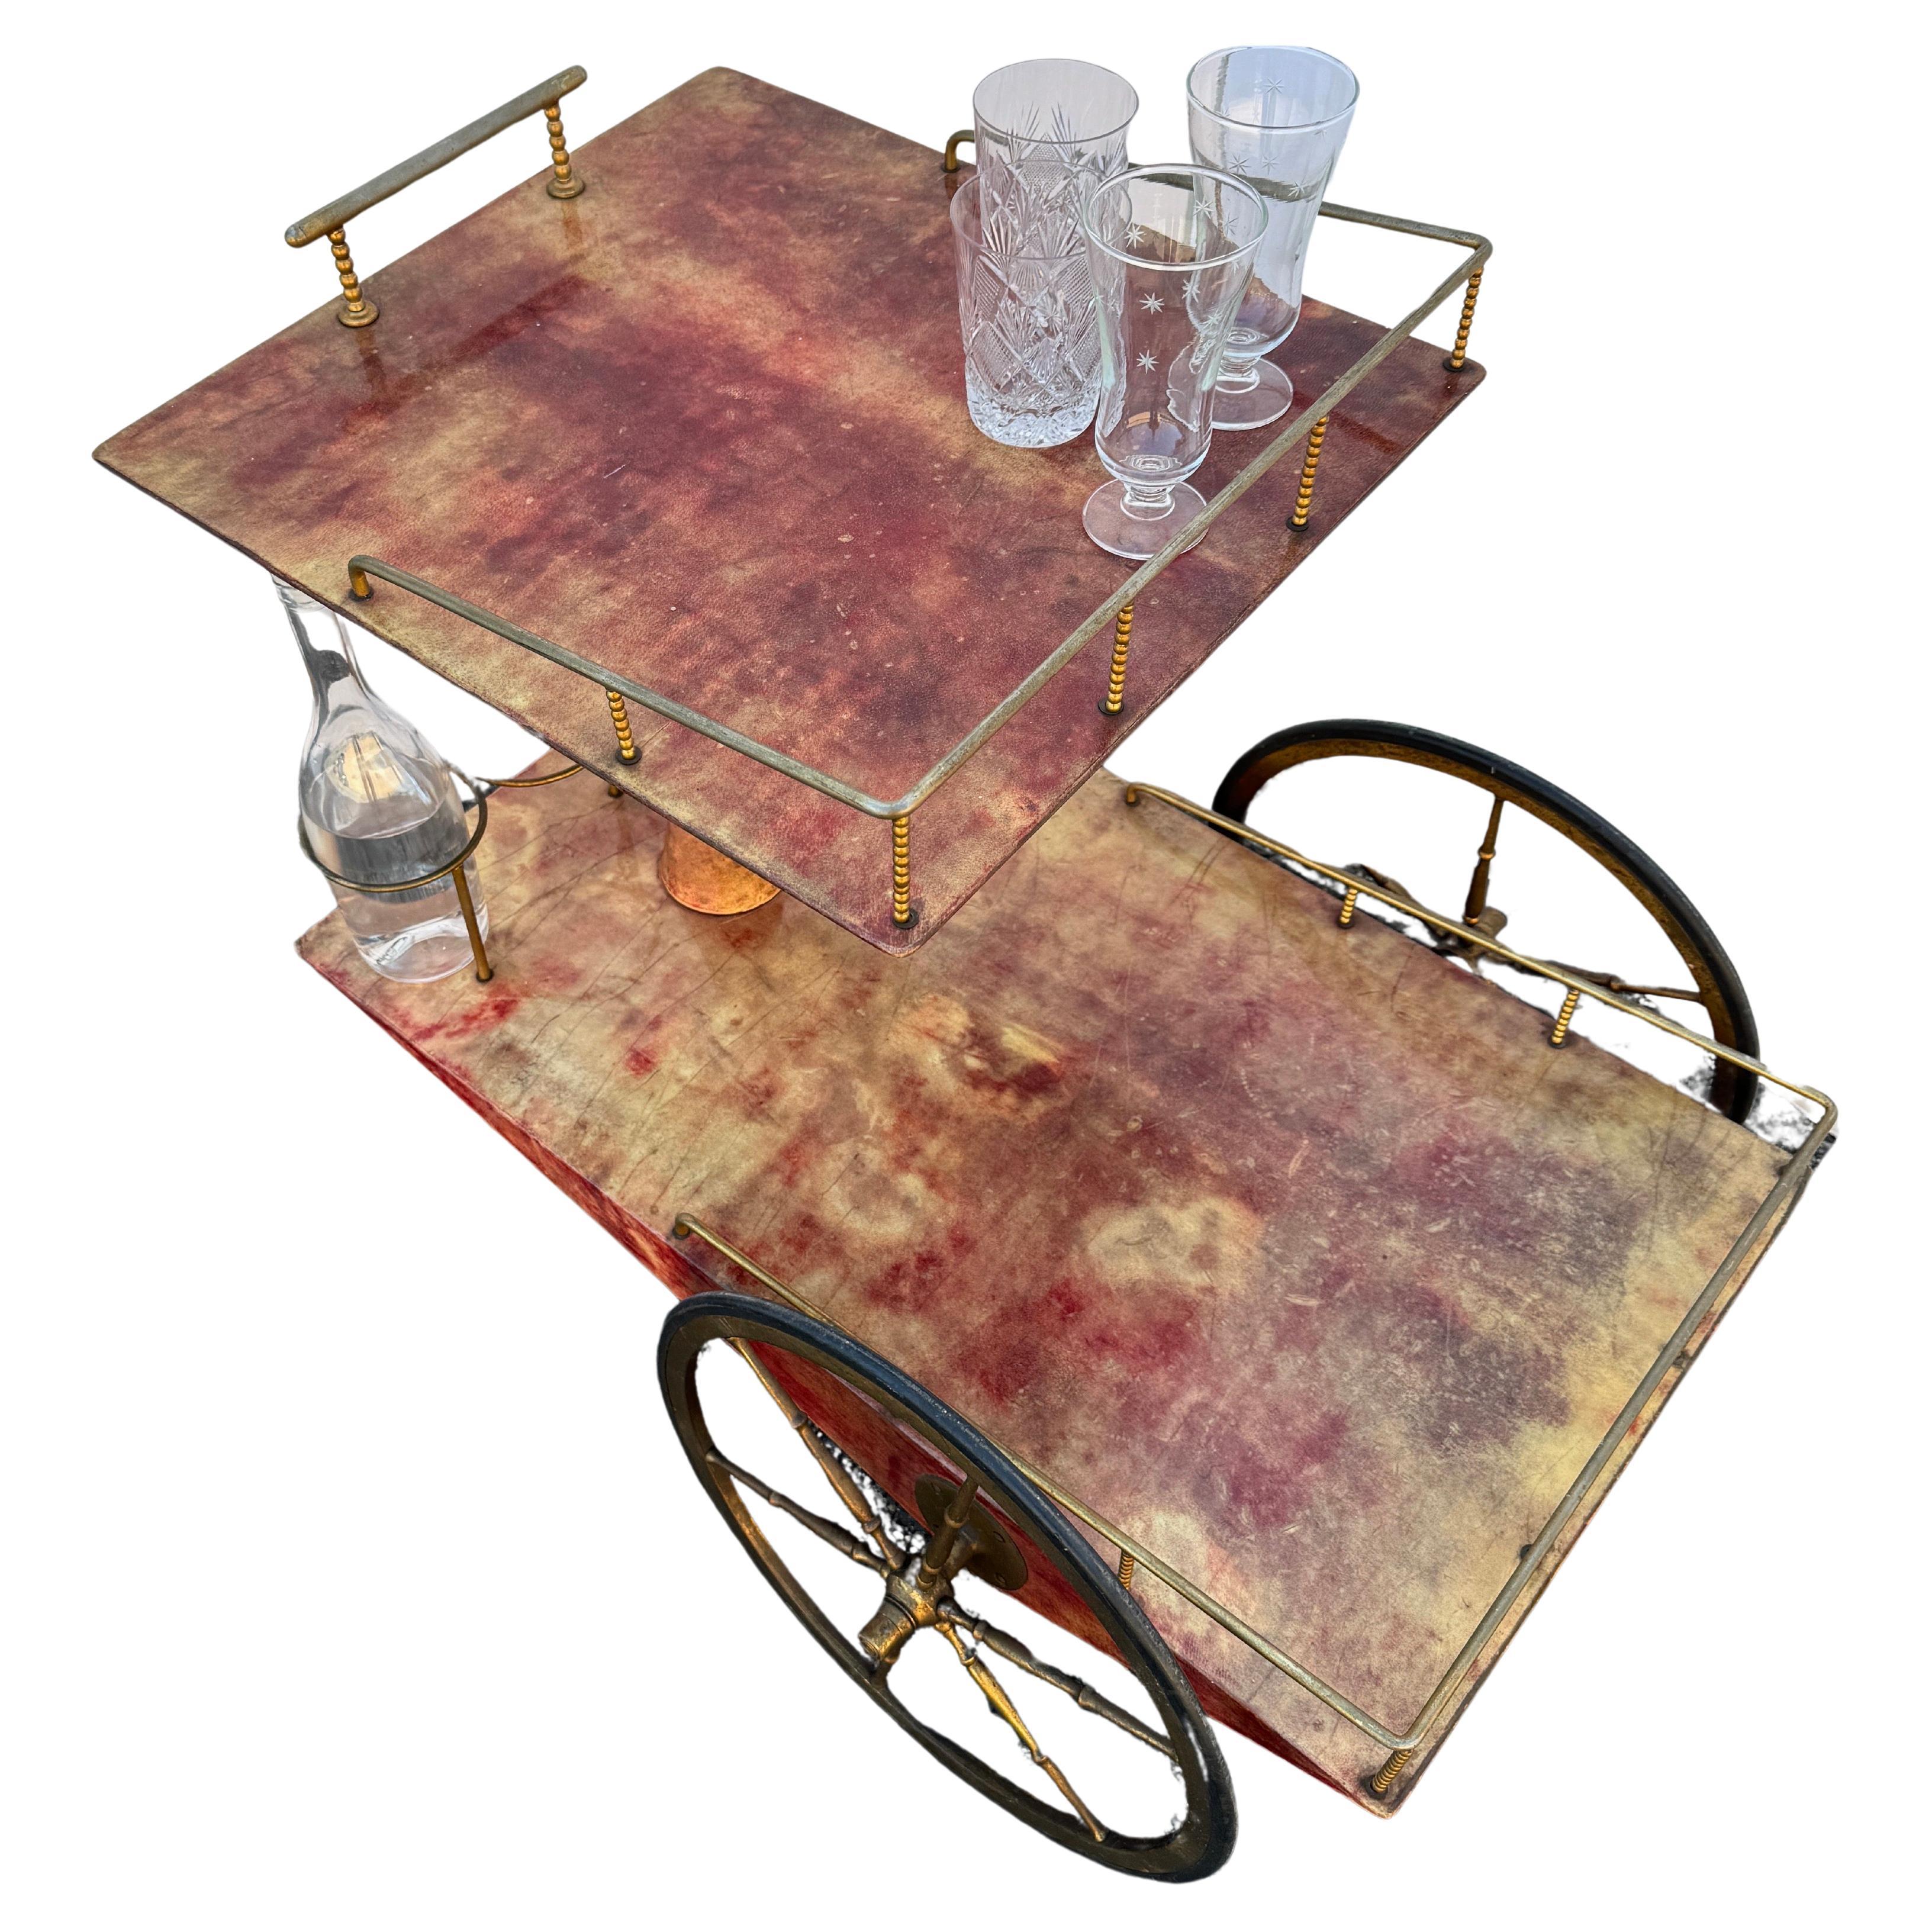 Mid-Century Modern Geometric Designed Bar Trolley, Italy 1960's.

An original vintage Aldo Tura trolley in dark brown lacquered goatskin and brass plated metal. Very geometric design that has the classic Aldo Tura Mid-Century charm and certainly a